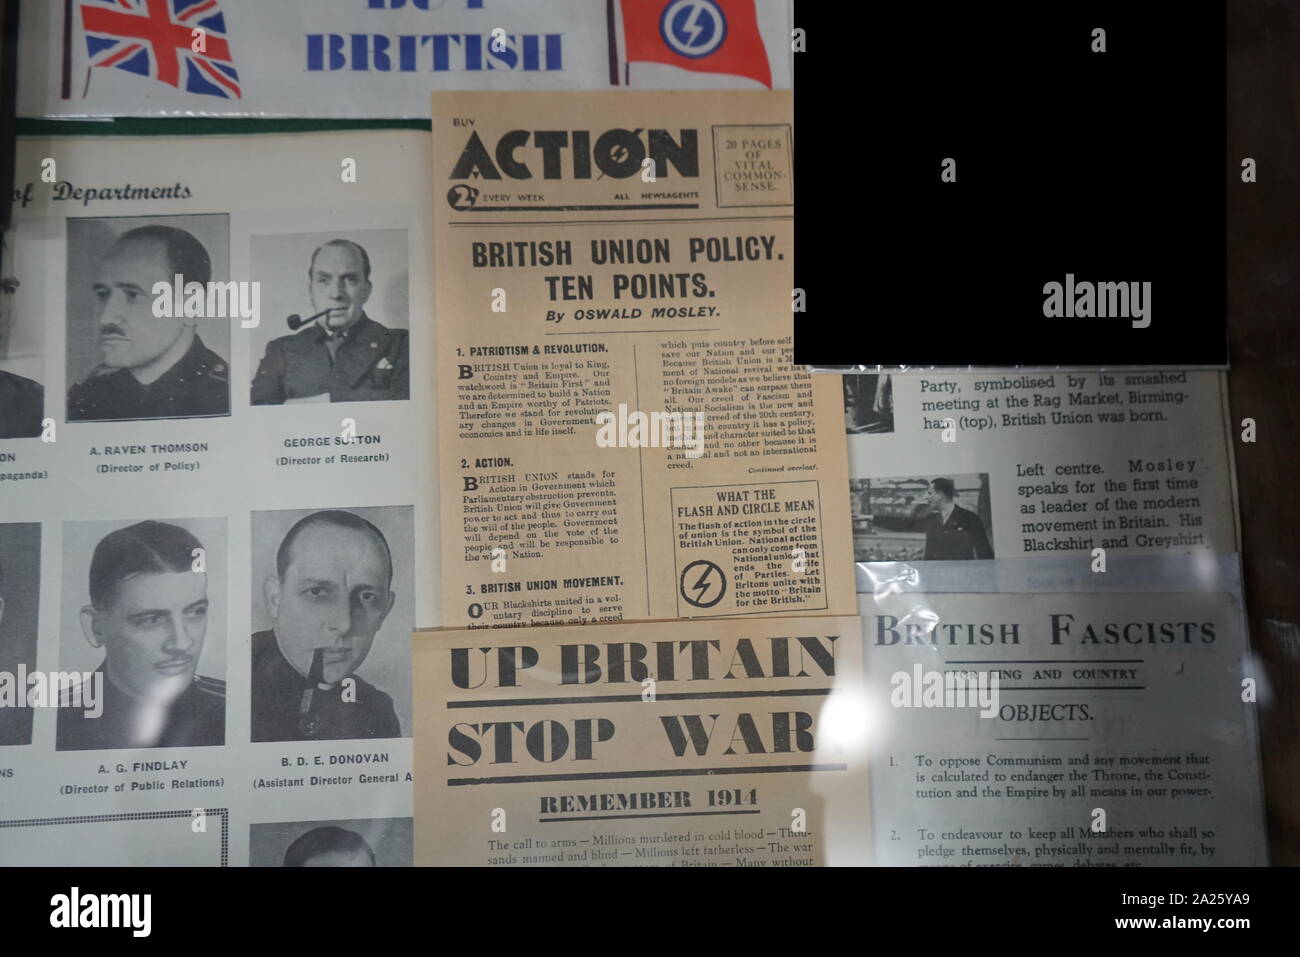 Pamphlet published by the British Union of Fascists. The BUF was a fascist political party in the United Kingdom formed in 1932 by Oswald Mosley (1896-1980) a British politician Stock Photo